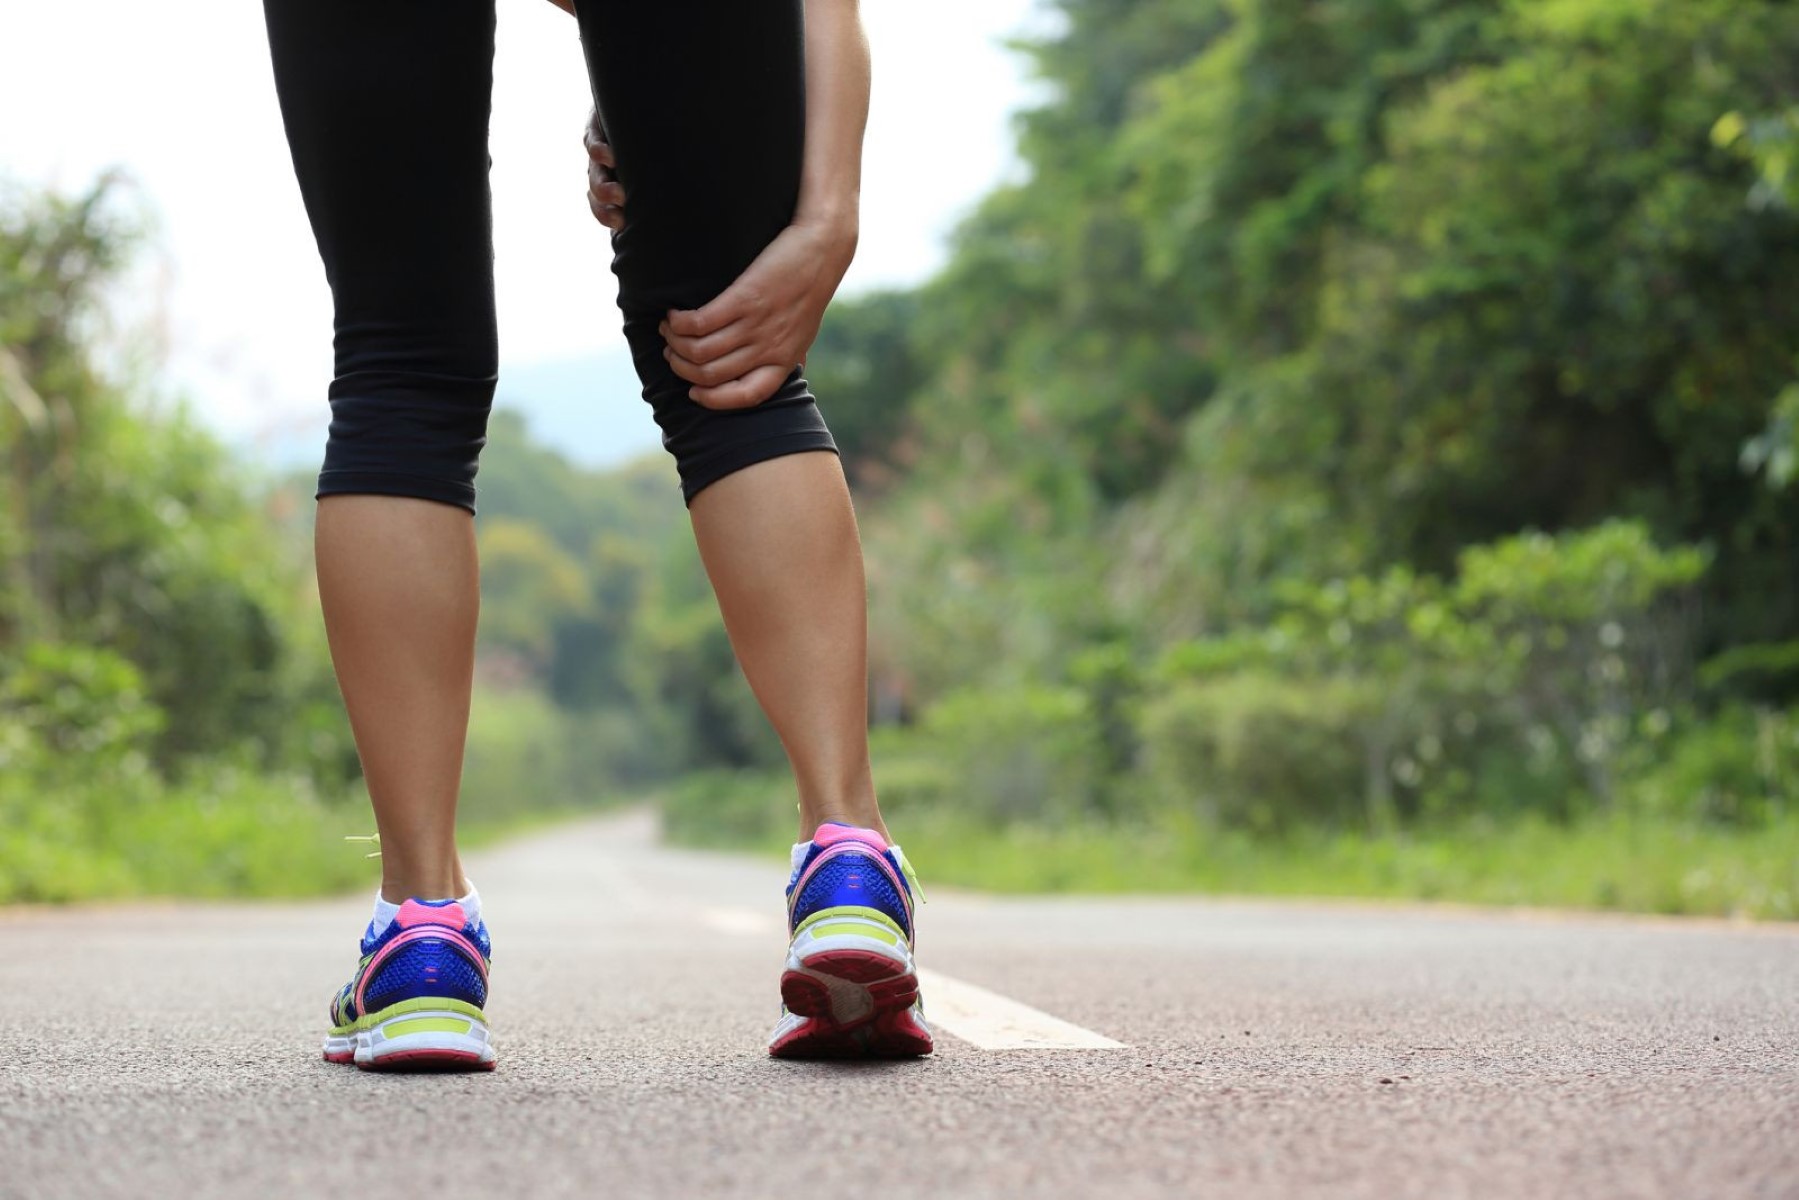 Leg Day: The Surprising Reason You Can't Walk